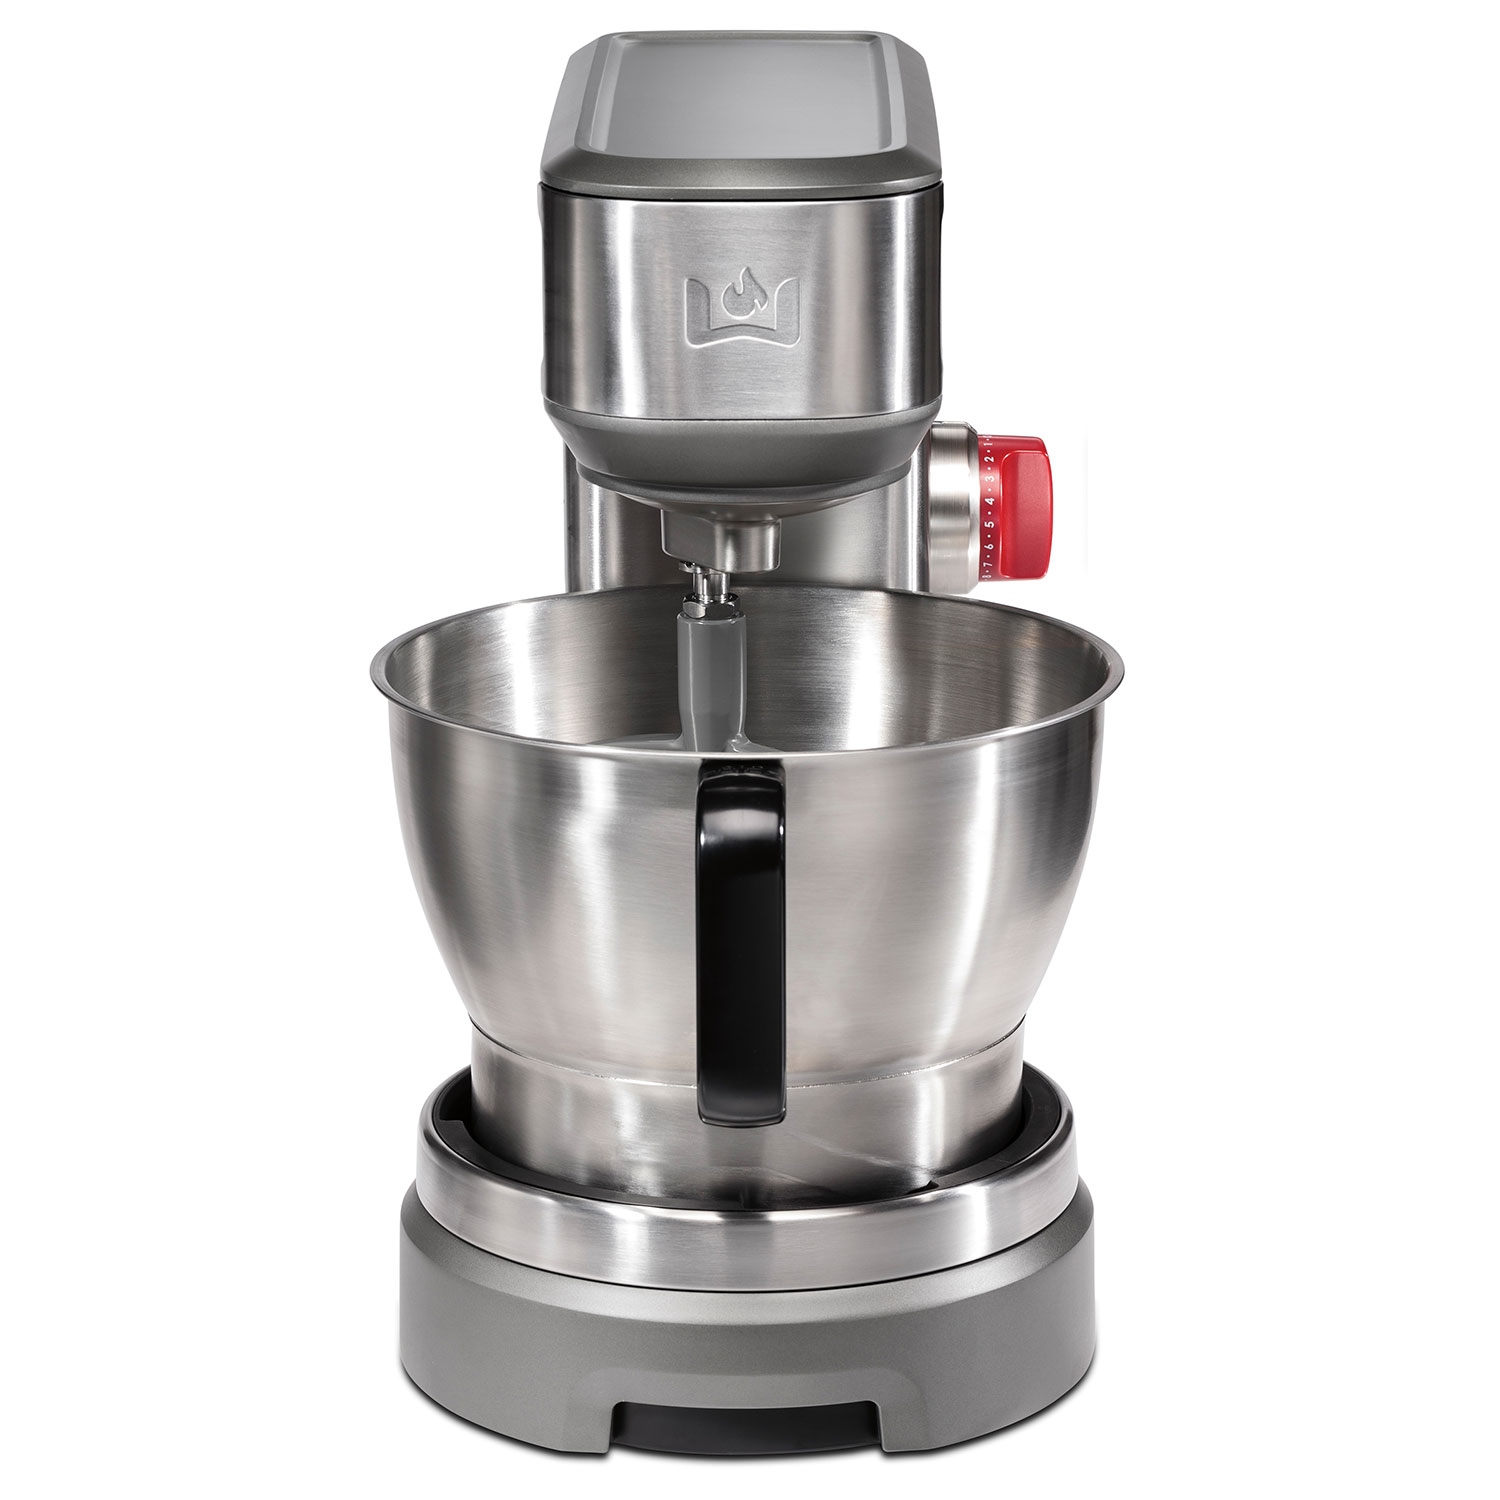 Wolf High-Performmance Stand Mixer, 7-qt, in Stainless Steel, NEW